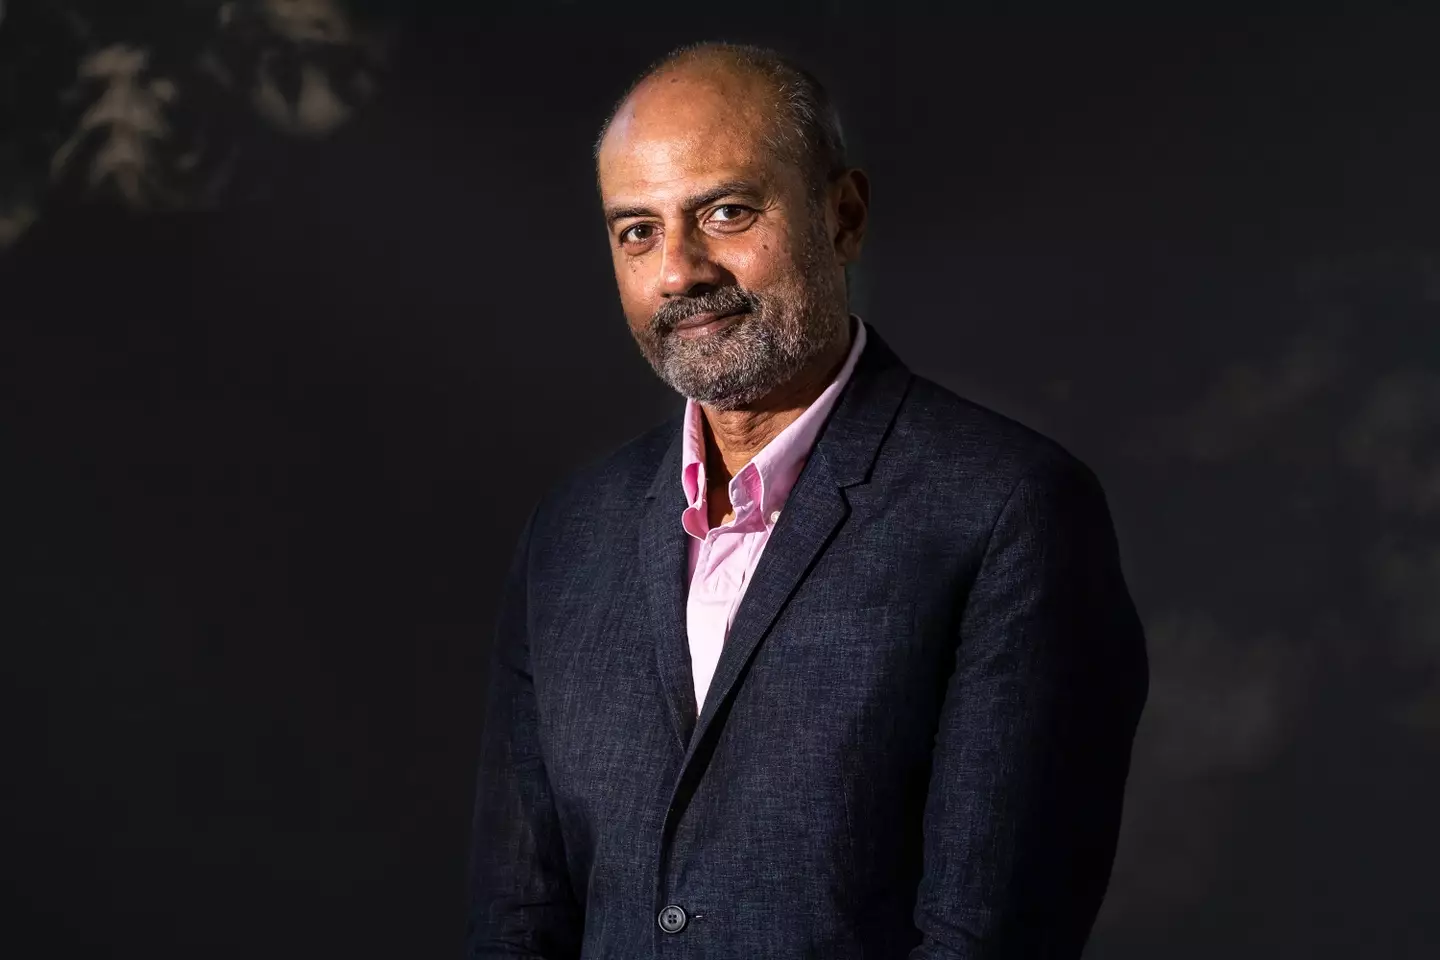 Respected newsreader George Alagiah was much missed by his colleagues.